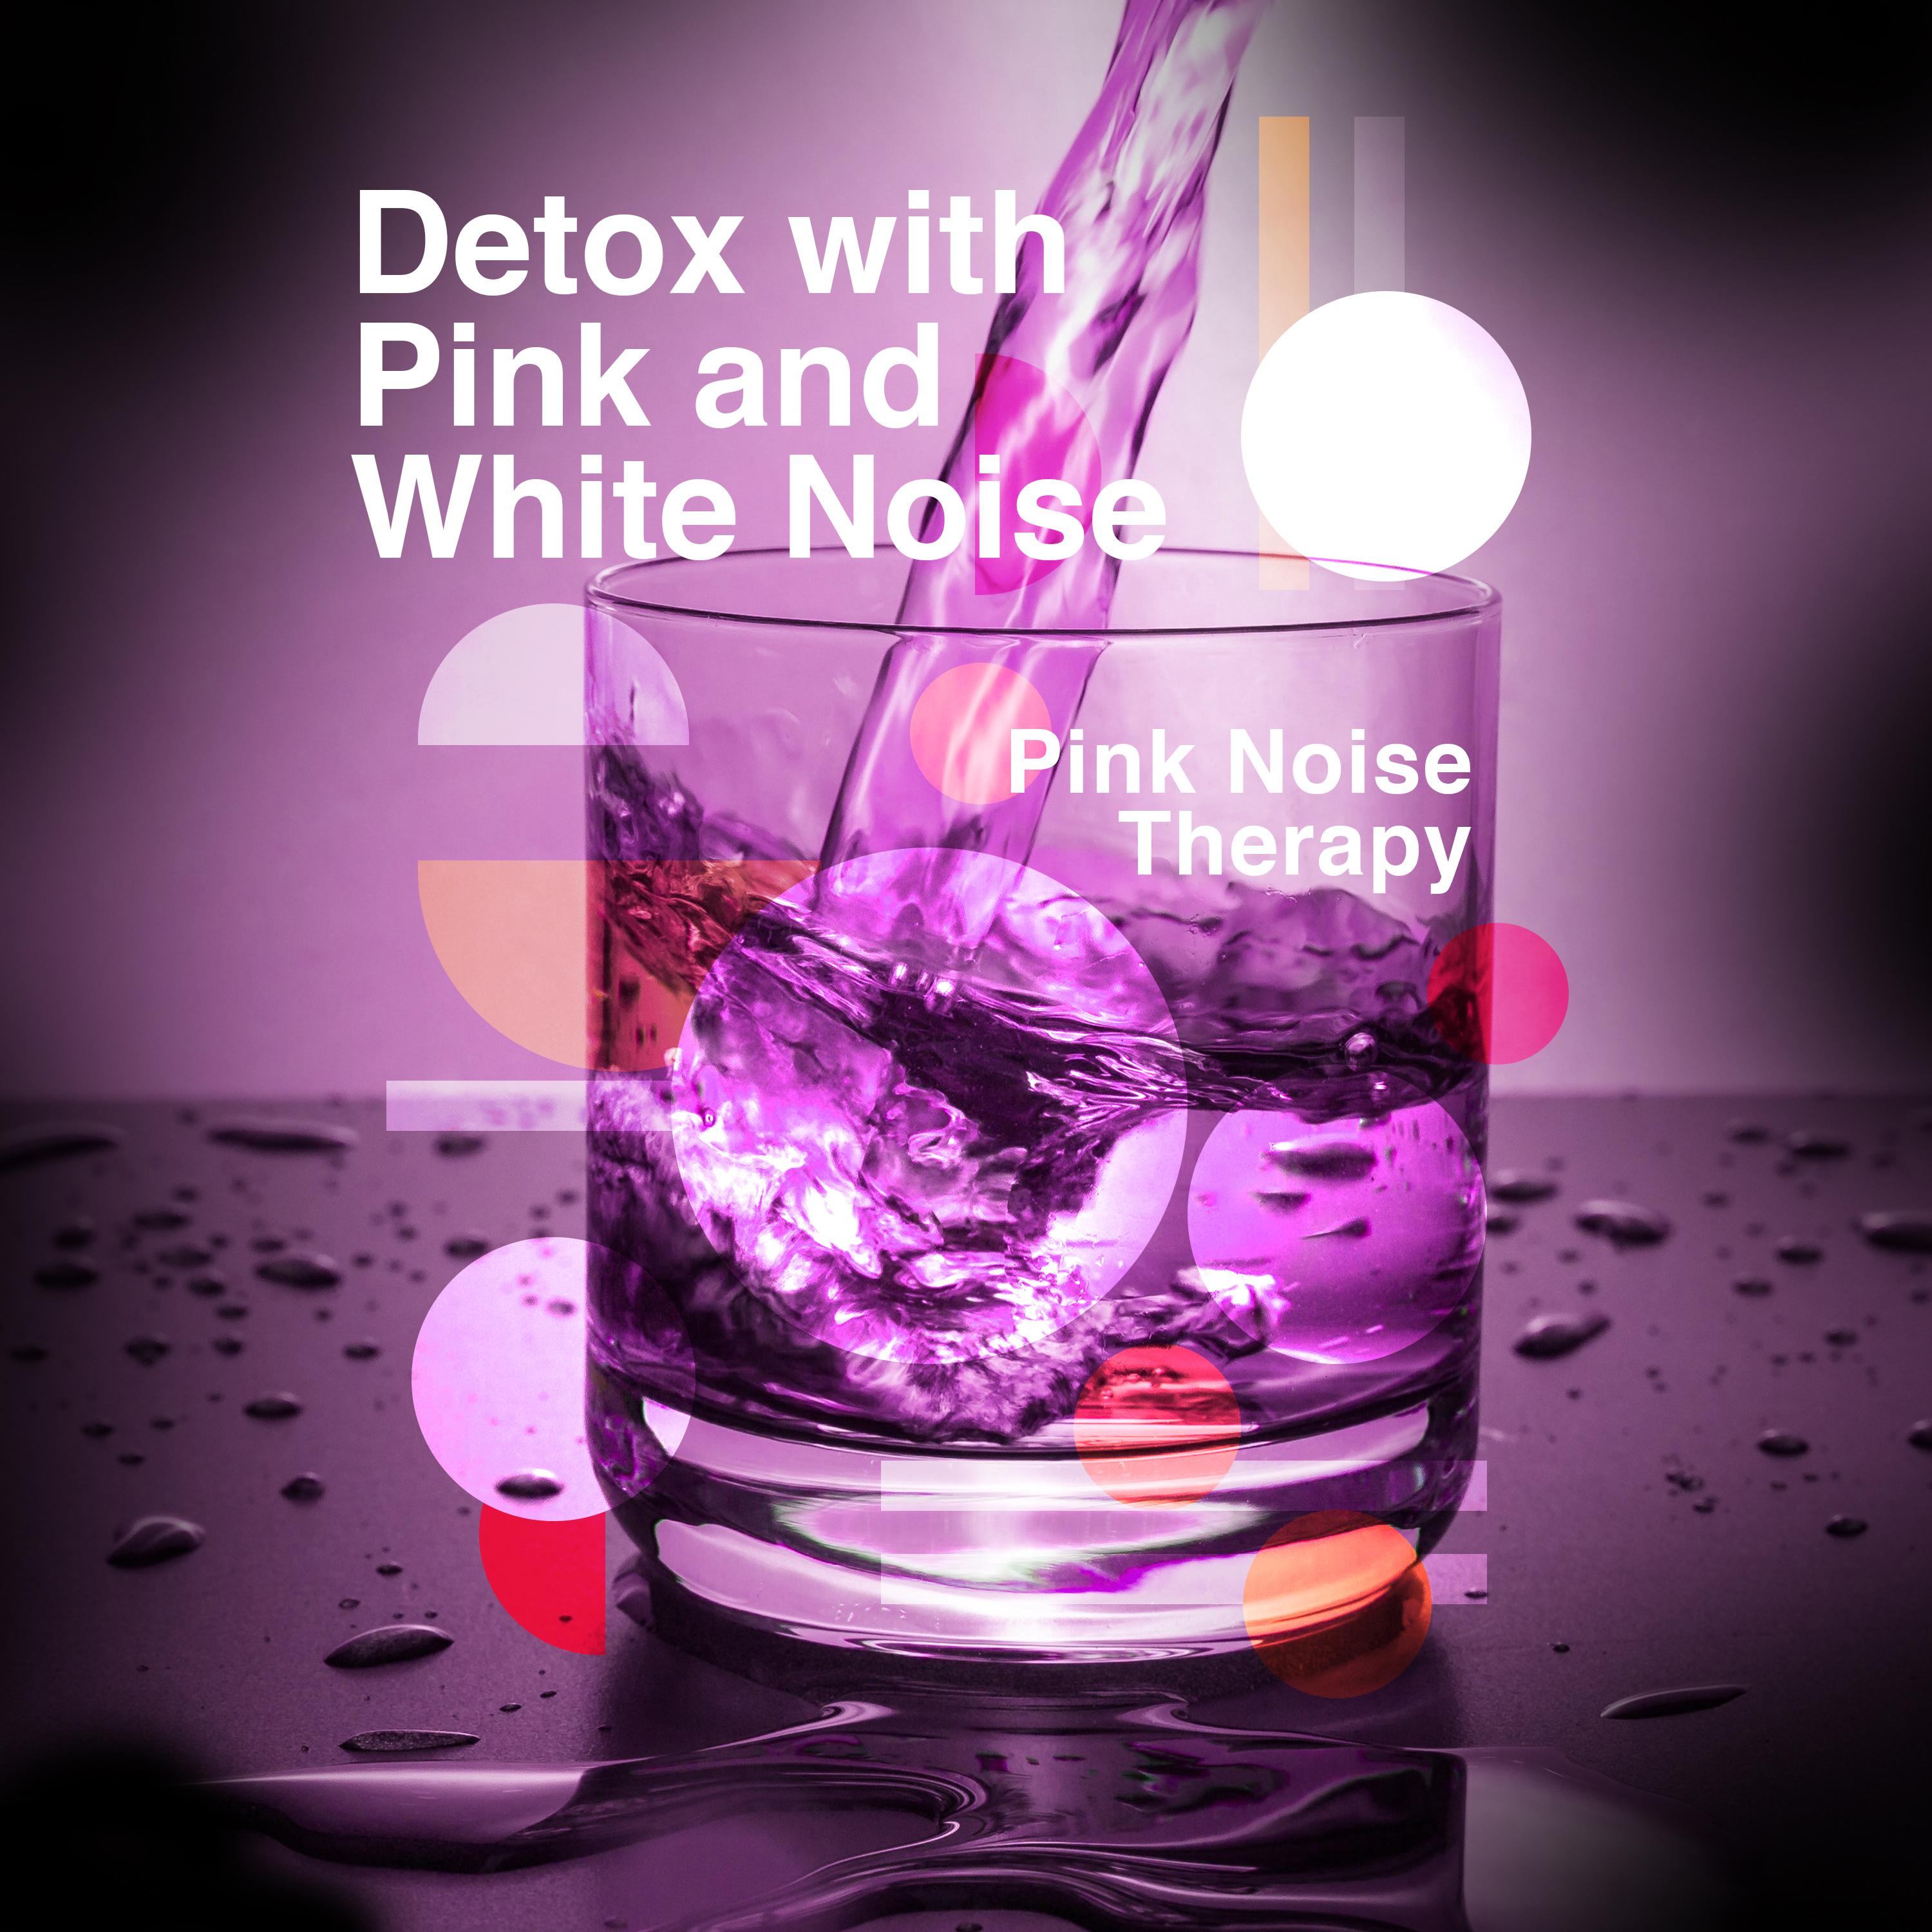 Detox with Pink and White Noise